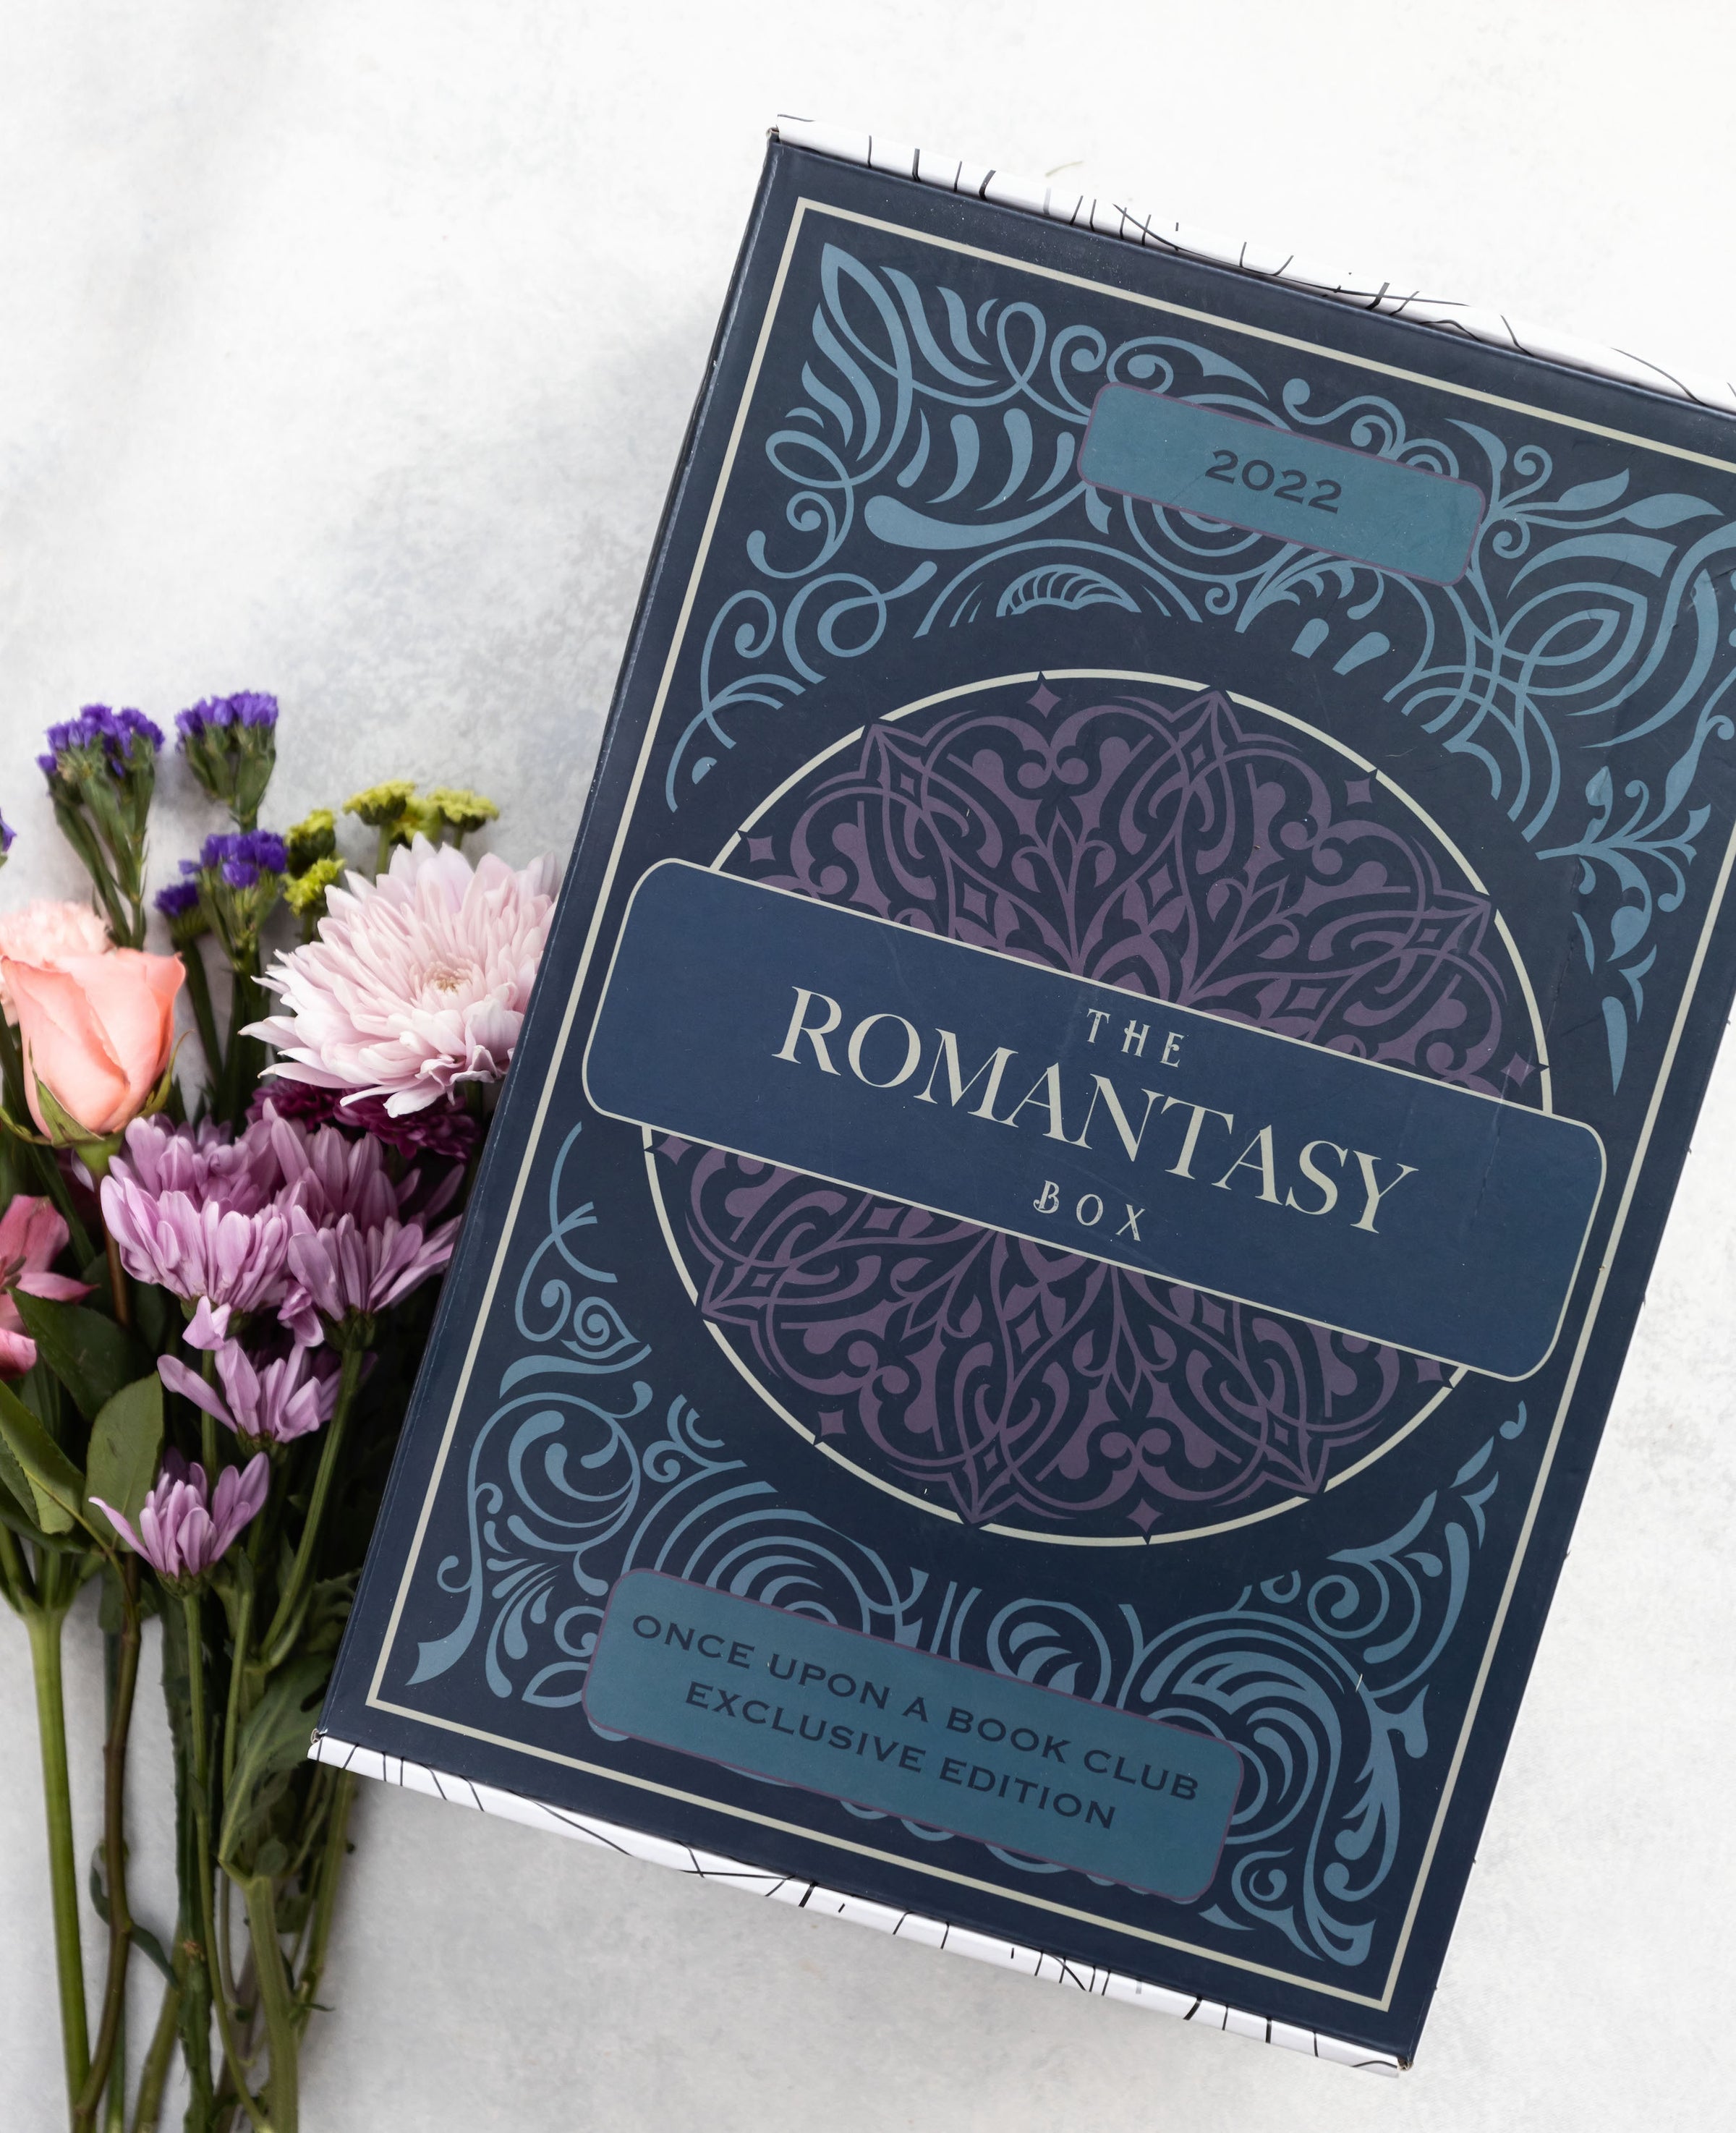 A large blue and purple special edition box titled The Romantasy Box sits on a white surface. Purple and pink flowers lay in a bouquet next to the box.